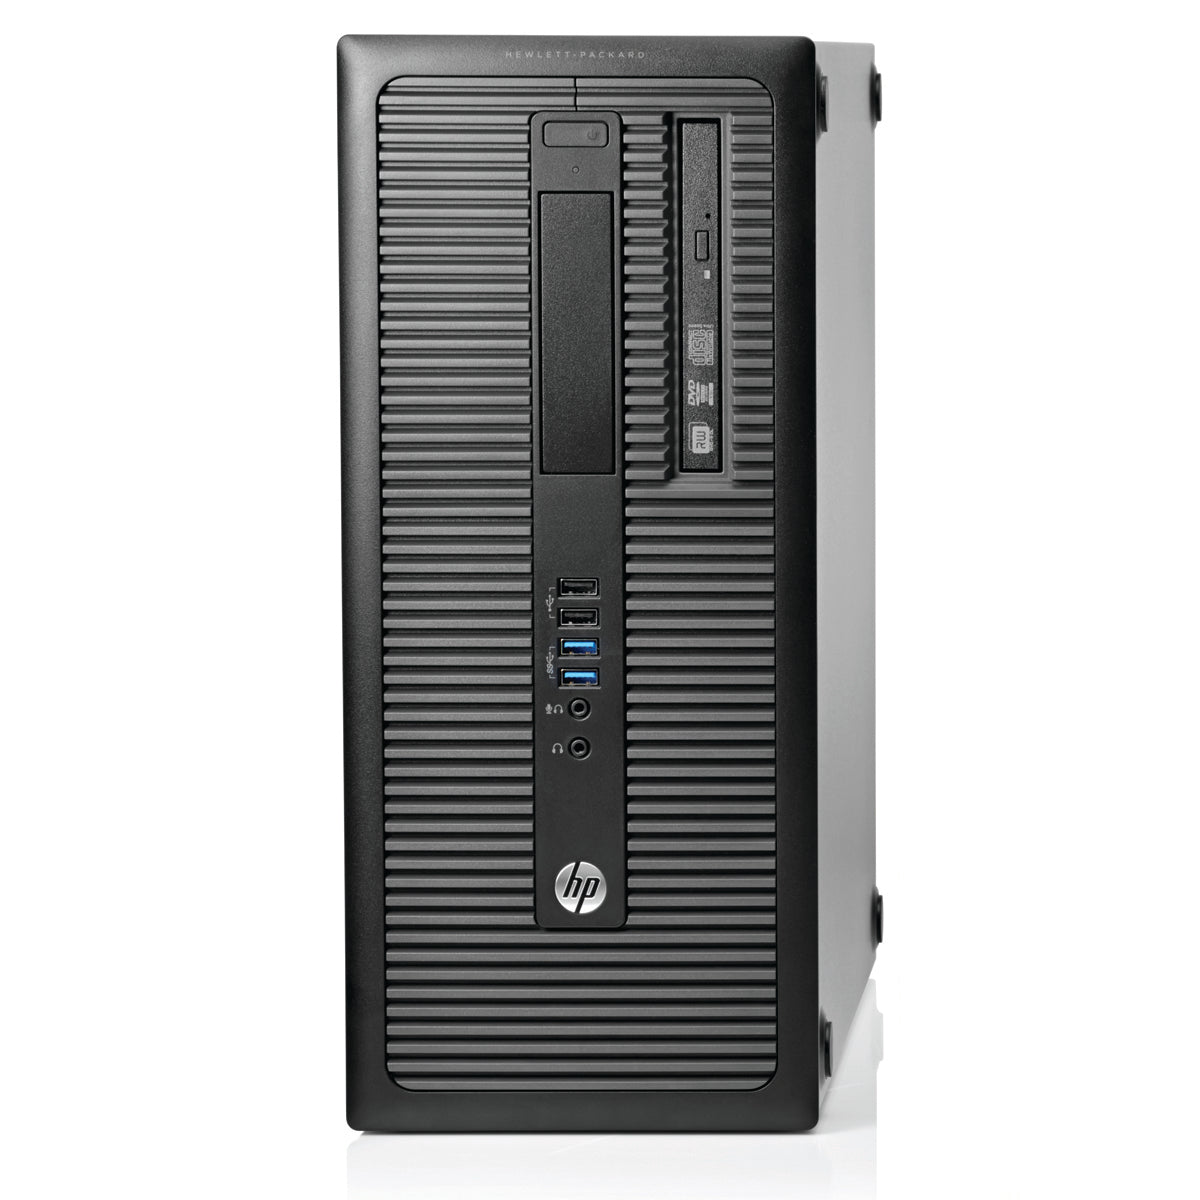 HP ProDesk 600 G1 Tower Core i5-4590 up to 3.7GHz 16GB Ram 240GB ...